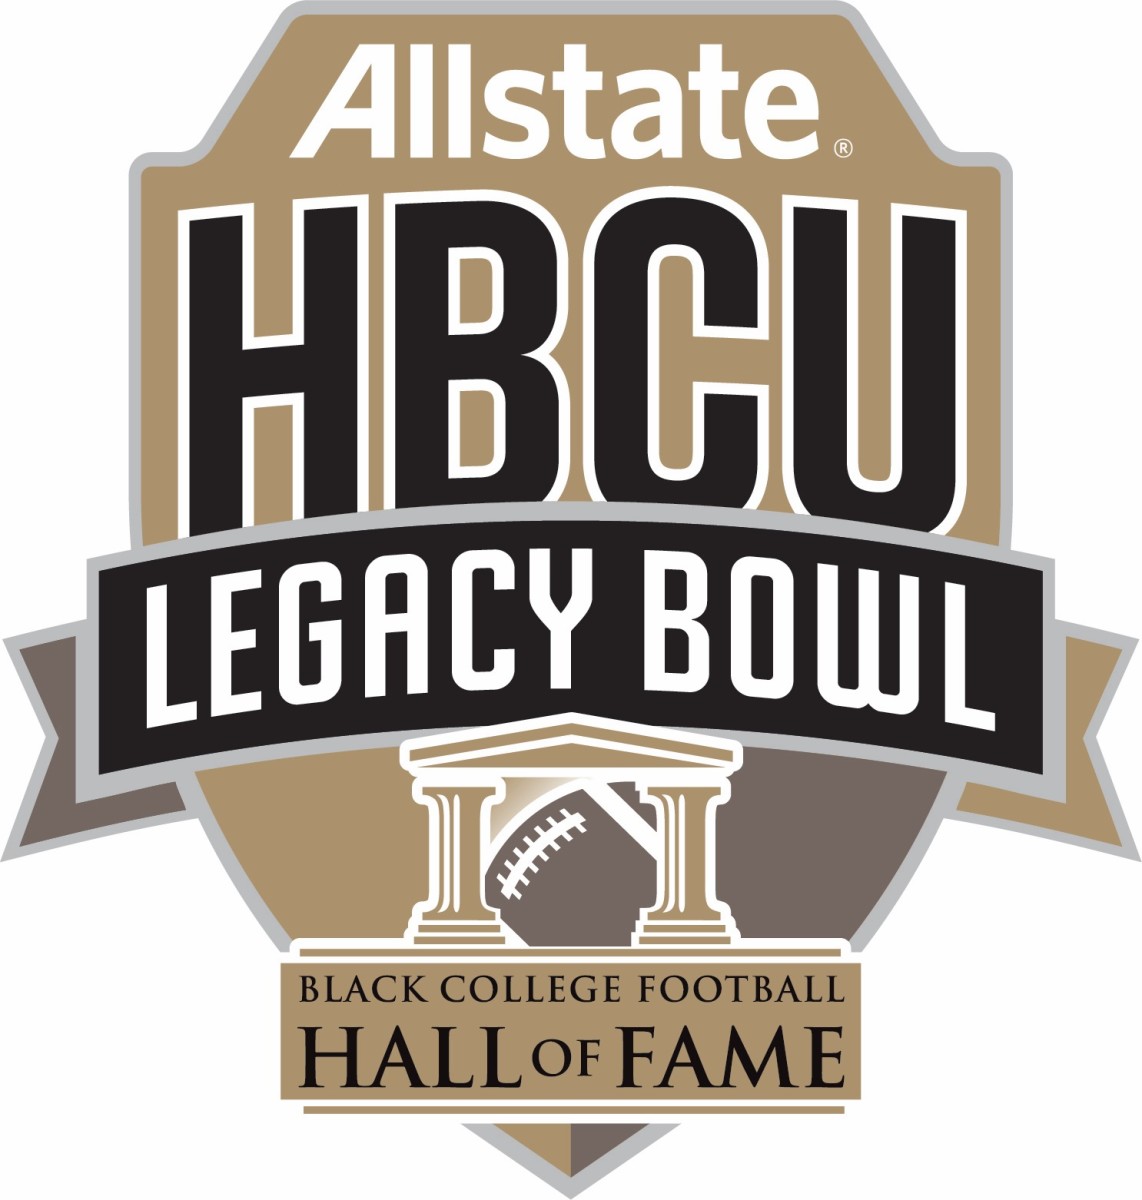 Allstate HBCU Legacy Bowl presented by the Black College Hall of Fame